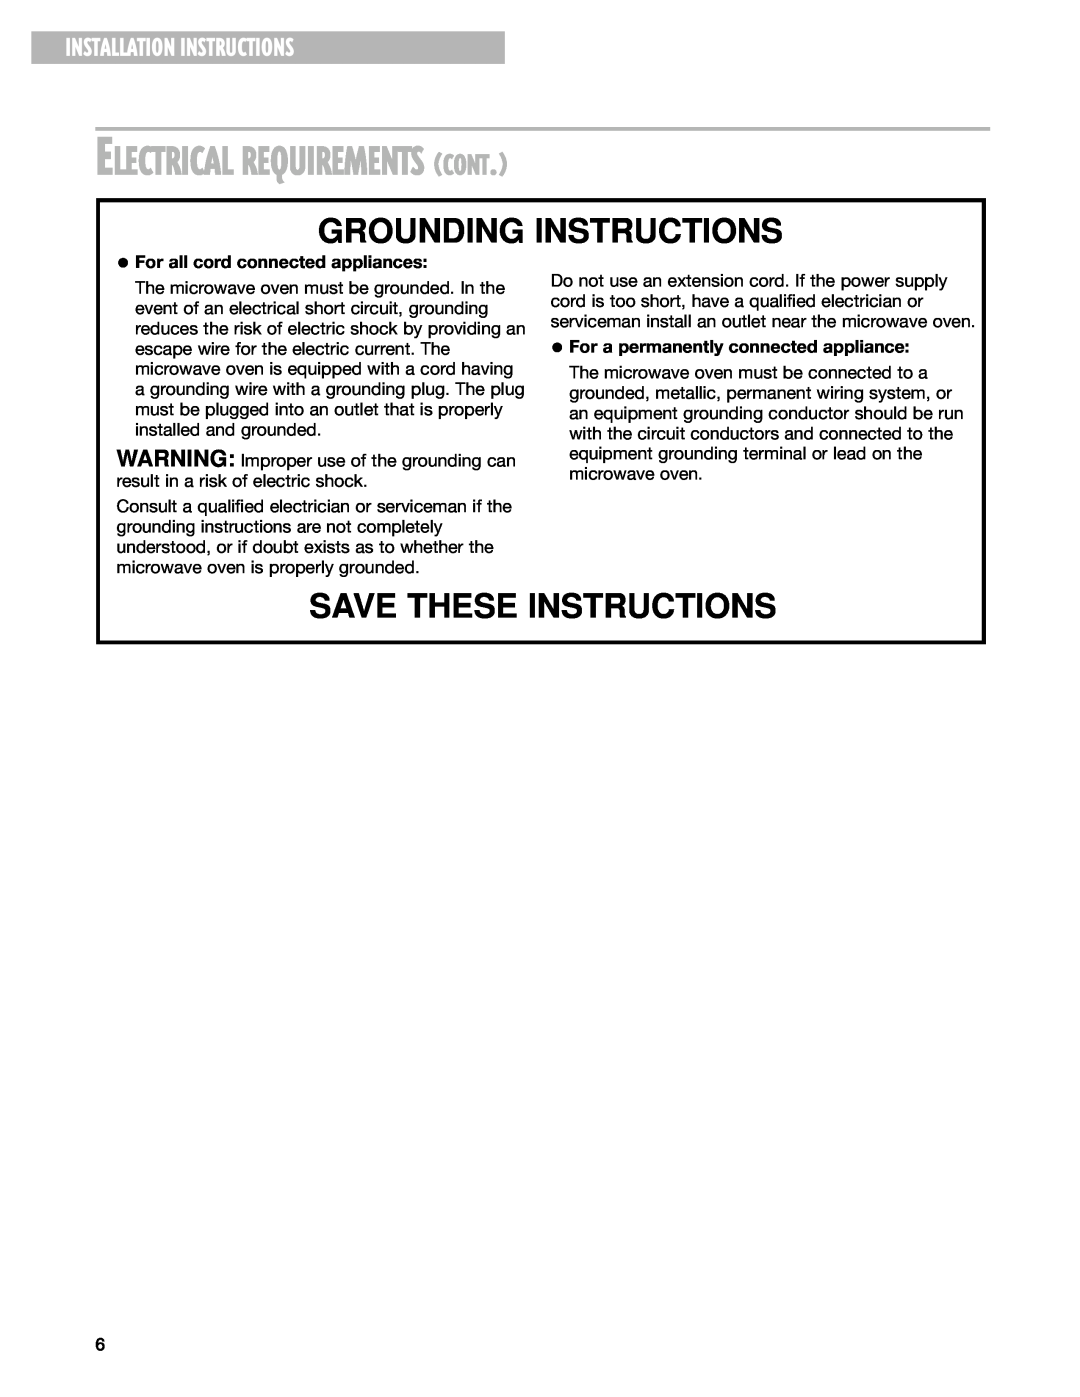 Whirlpool YMT3135SH, YMT3115SH Electrical Requirements Cont, Grounding Instructions, Installation Instructions 